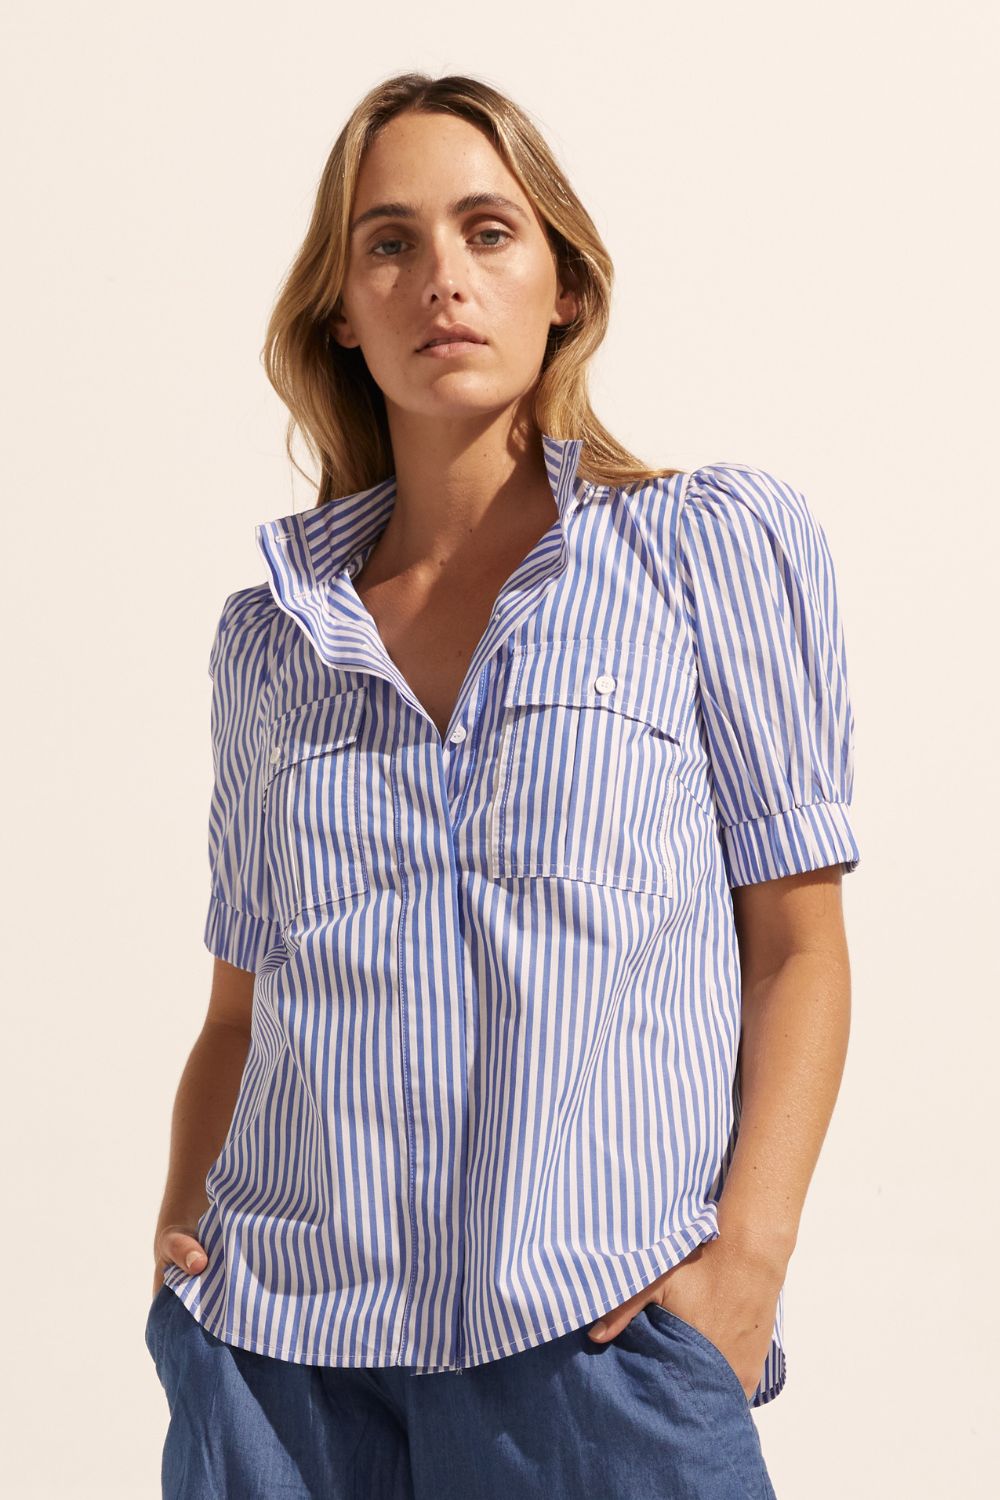 blue and white stripe, high neck, button down, mid length sleeve, curved hem, shirt, front image